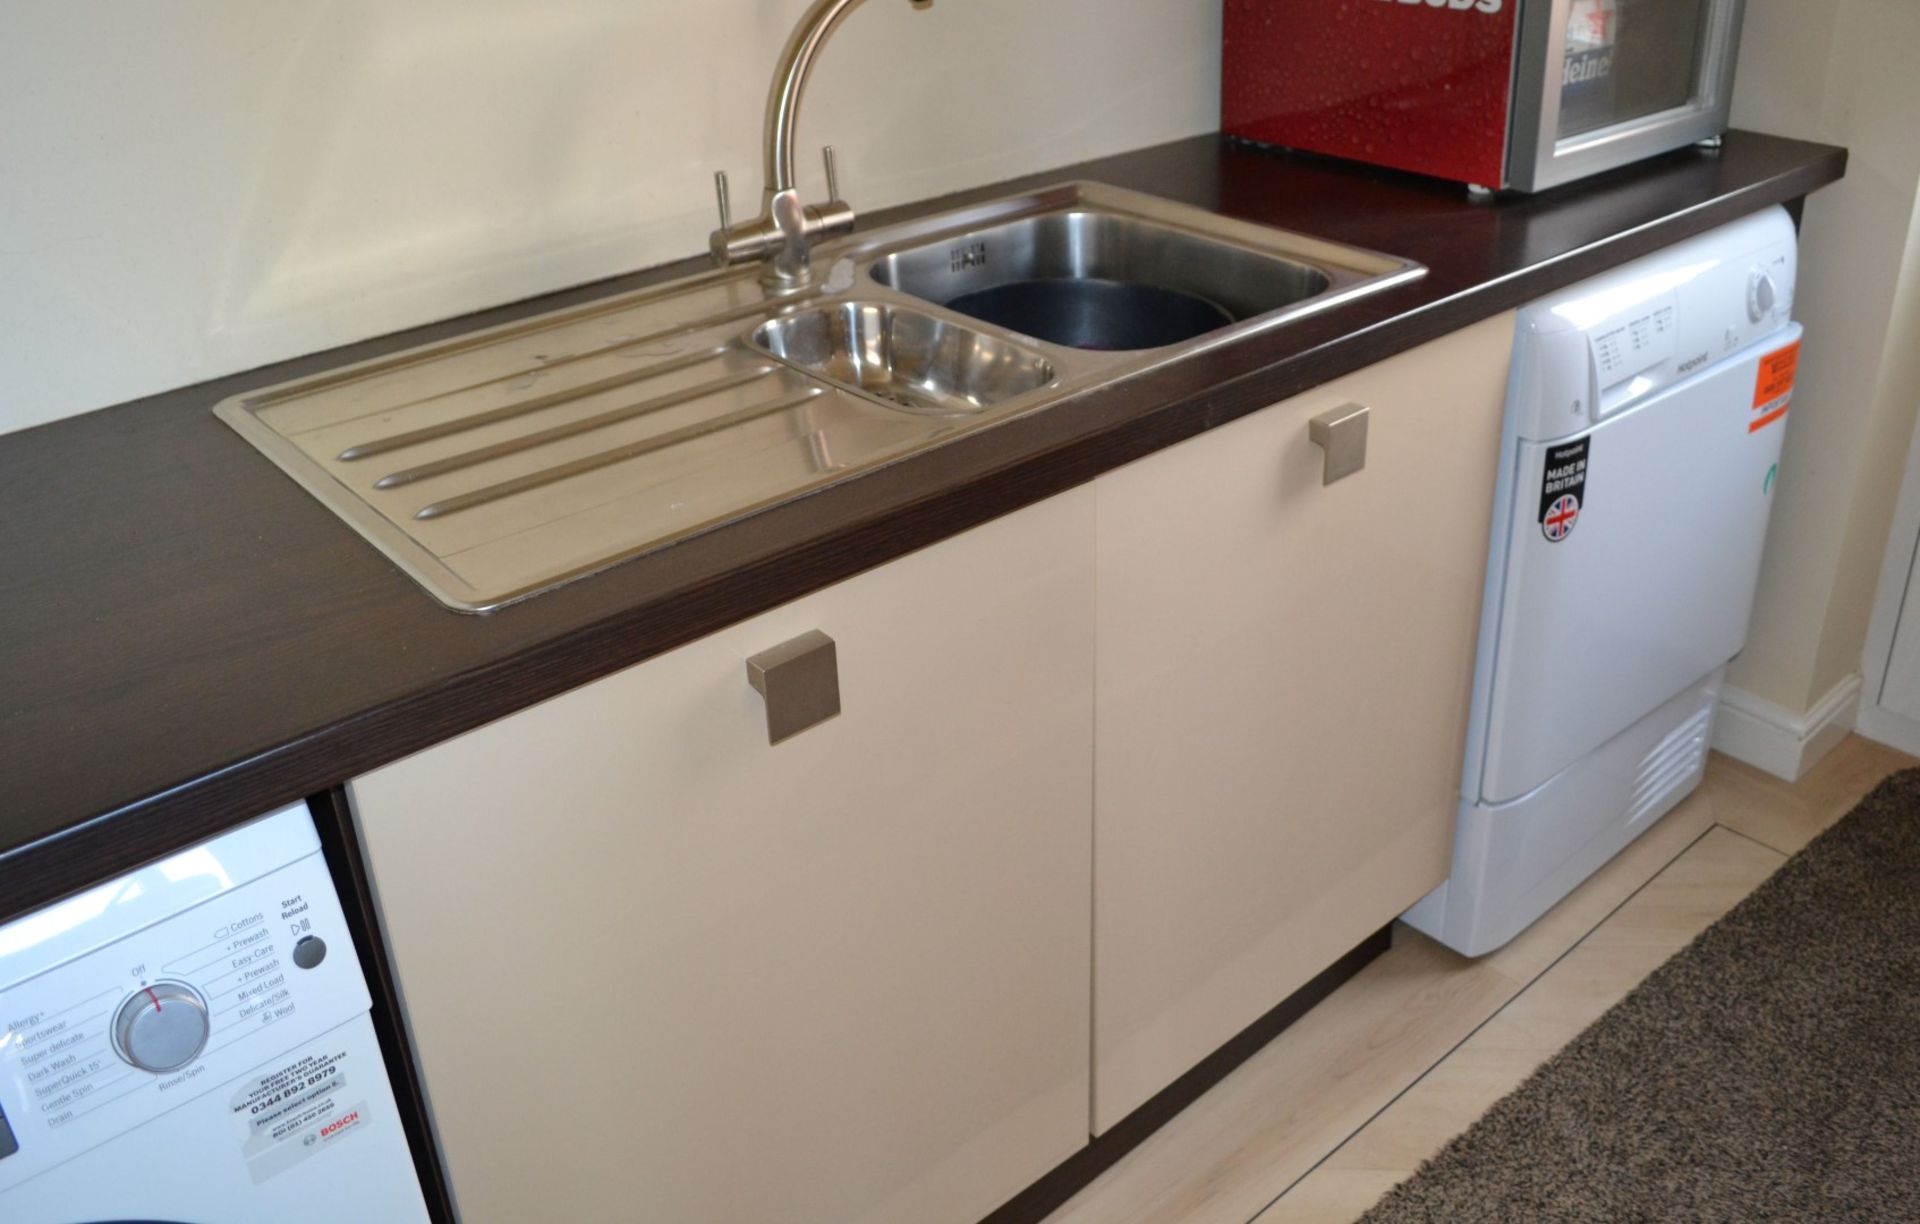 1 x Kitchen Design Bespoke Fitted Kitchen With Utility Room, Granite Worktops And Neff Appliances - - Image 39 of 41